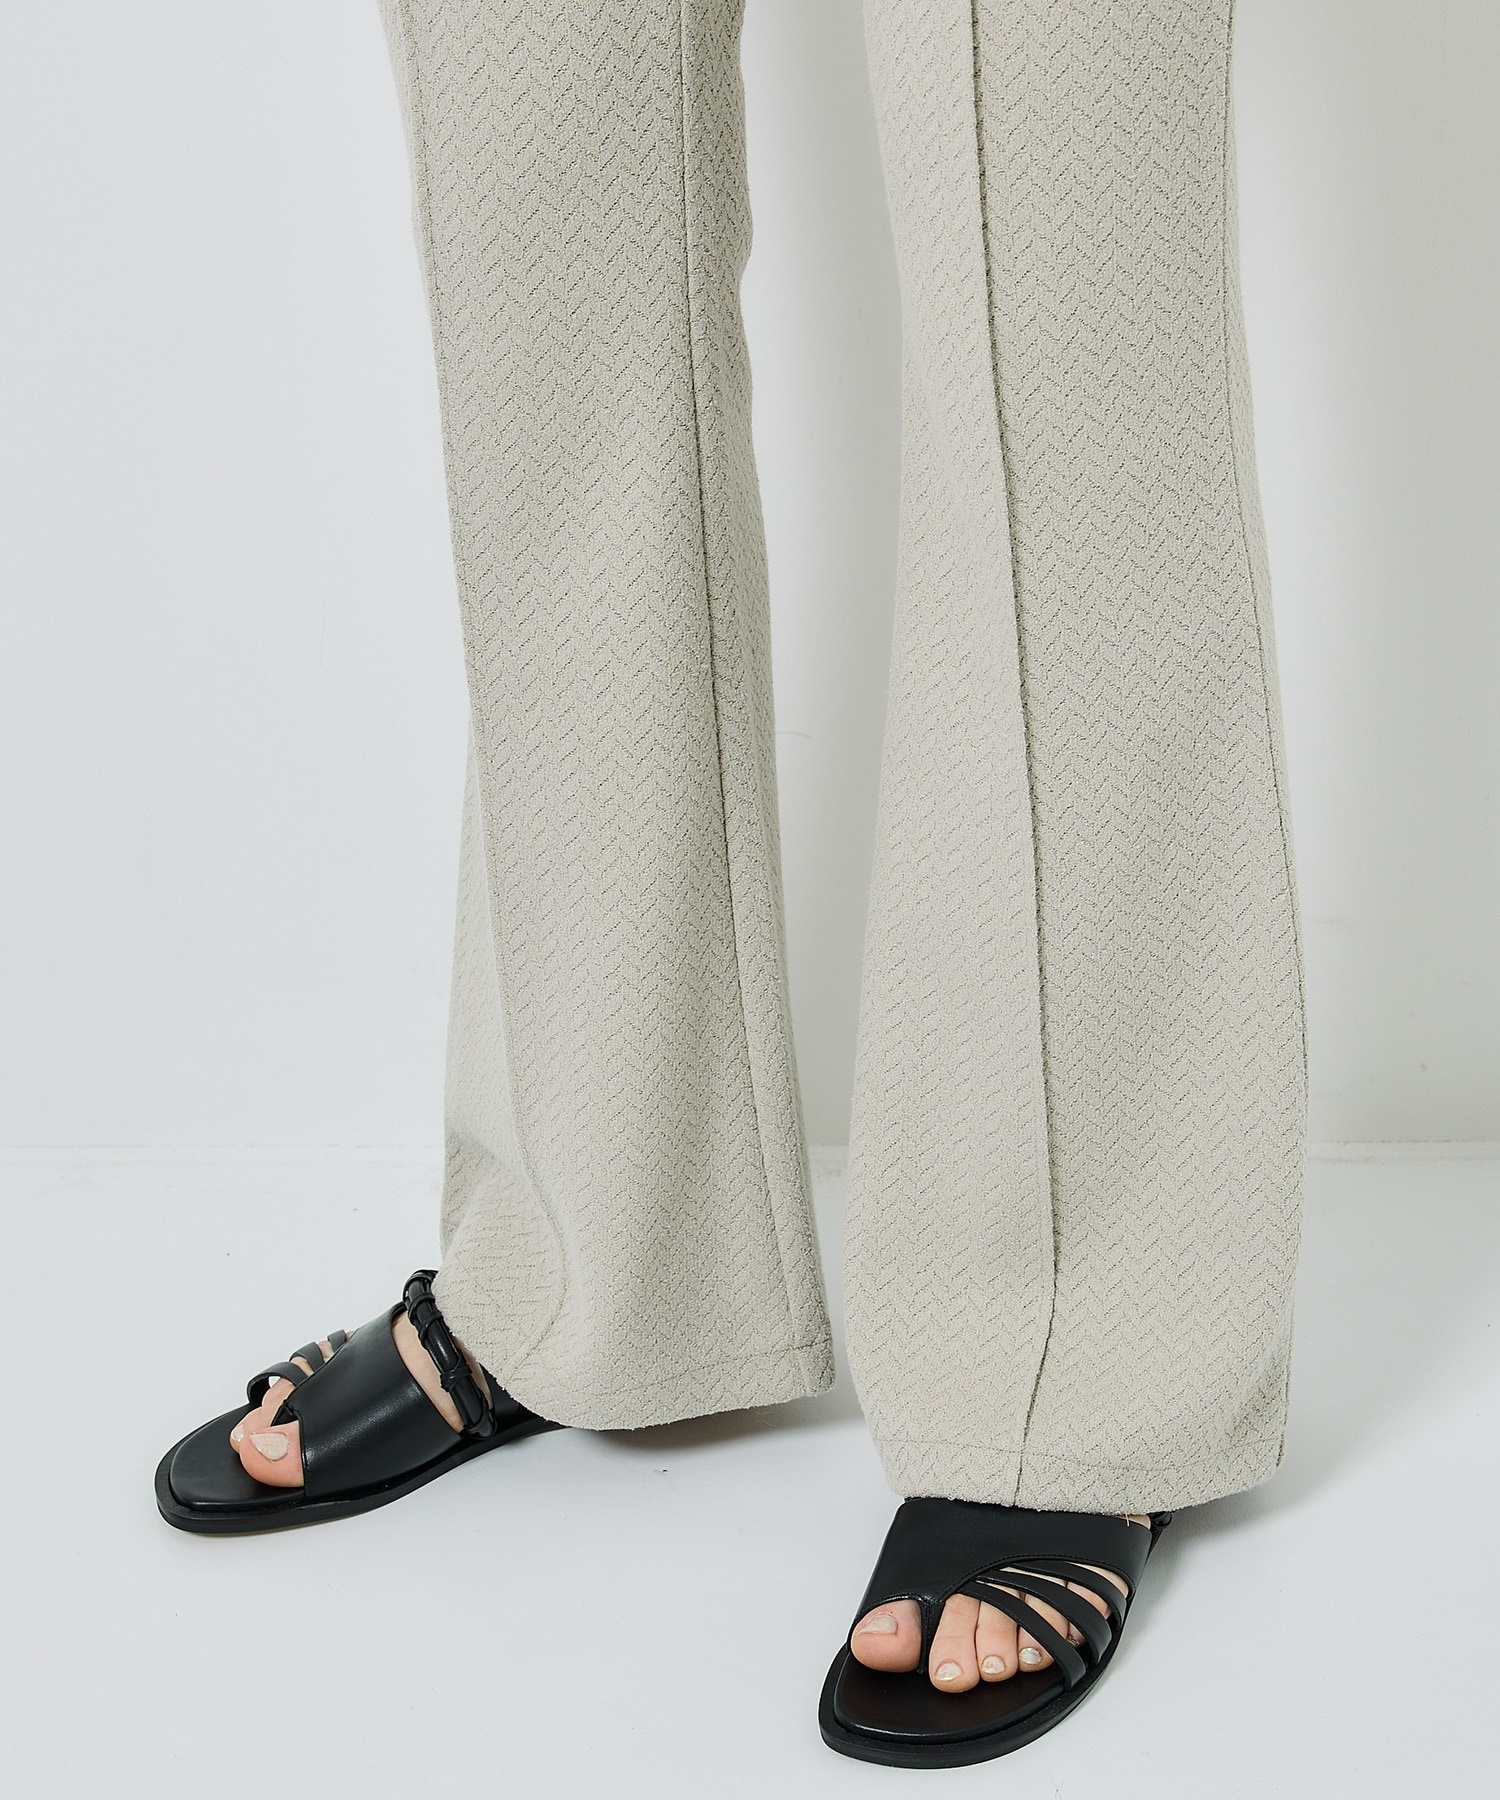 Almighty Stretch Flare Pants STUDIOUS